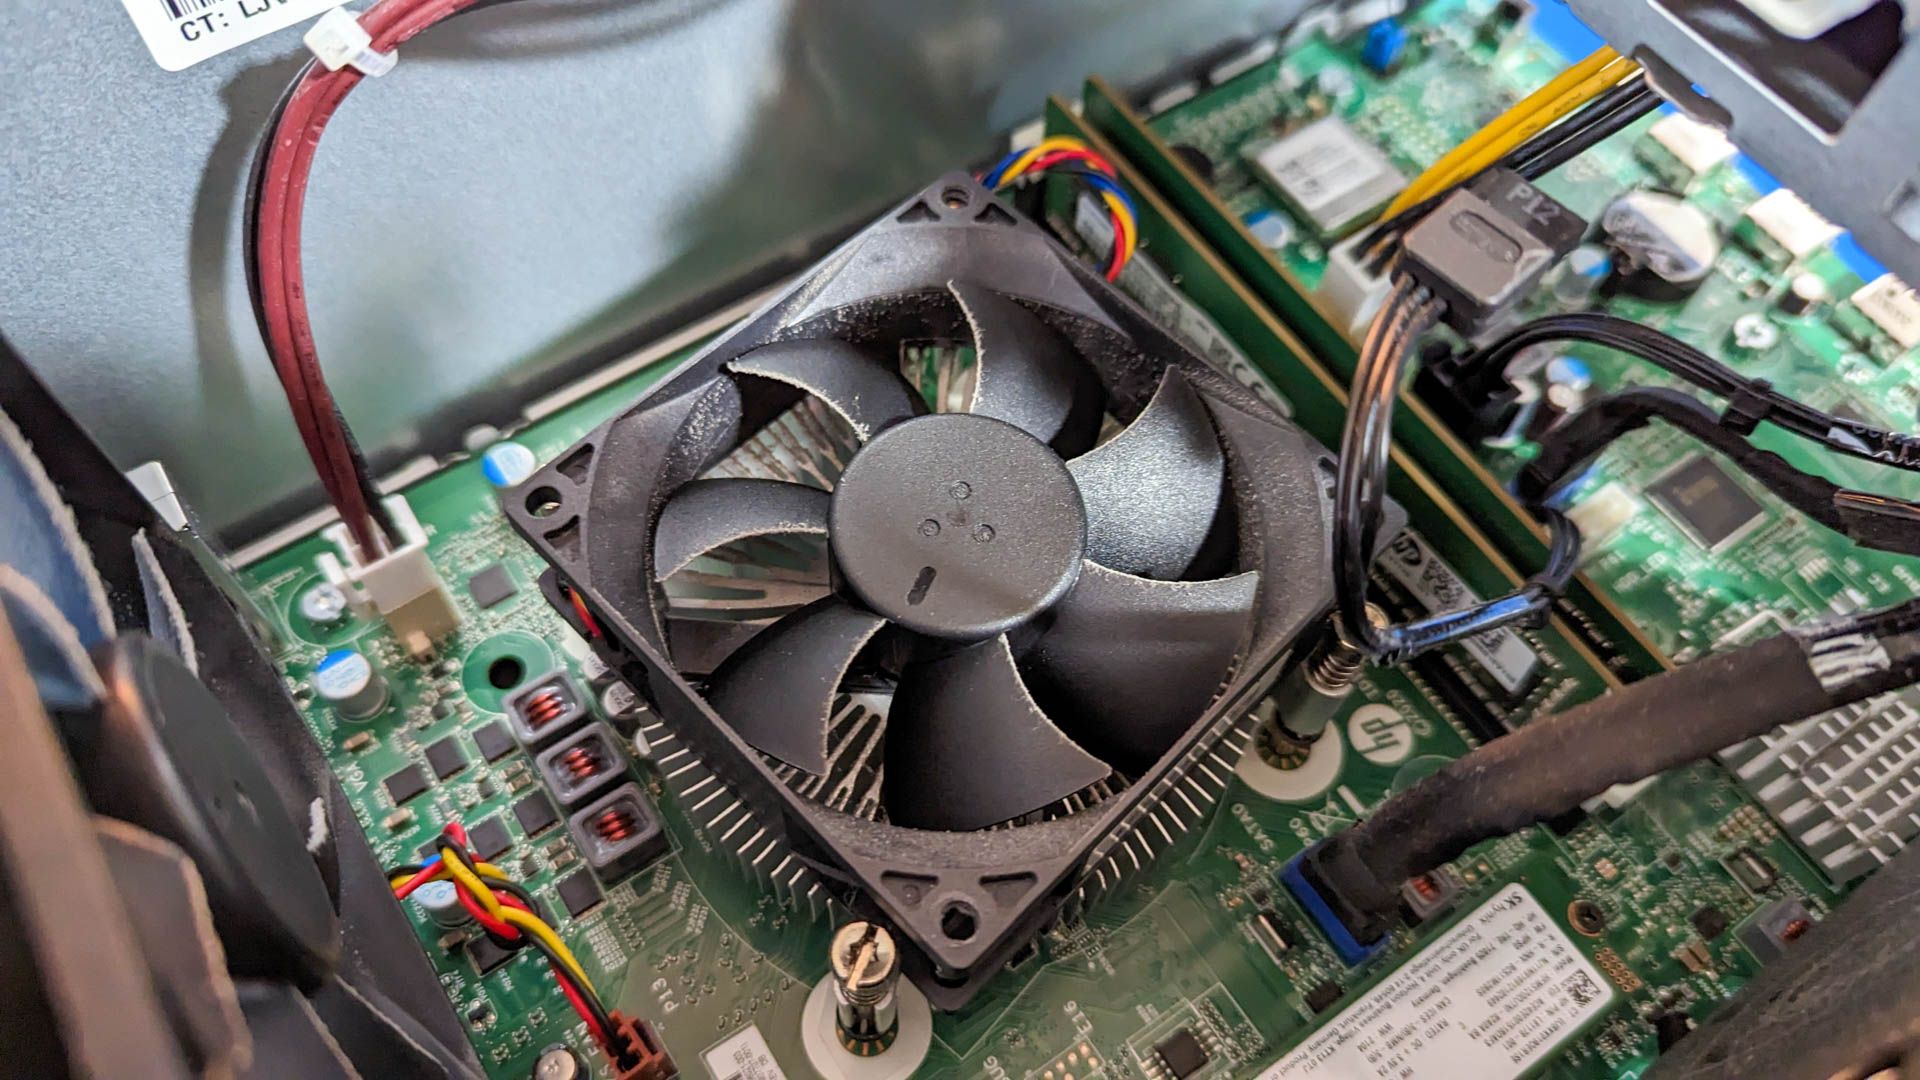 Dusty cooling fans inside a PC tower